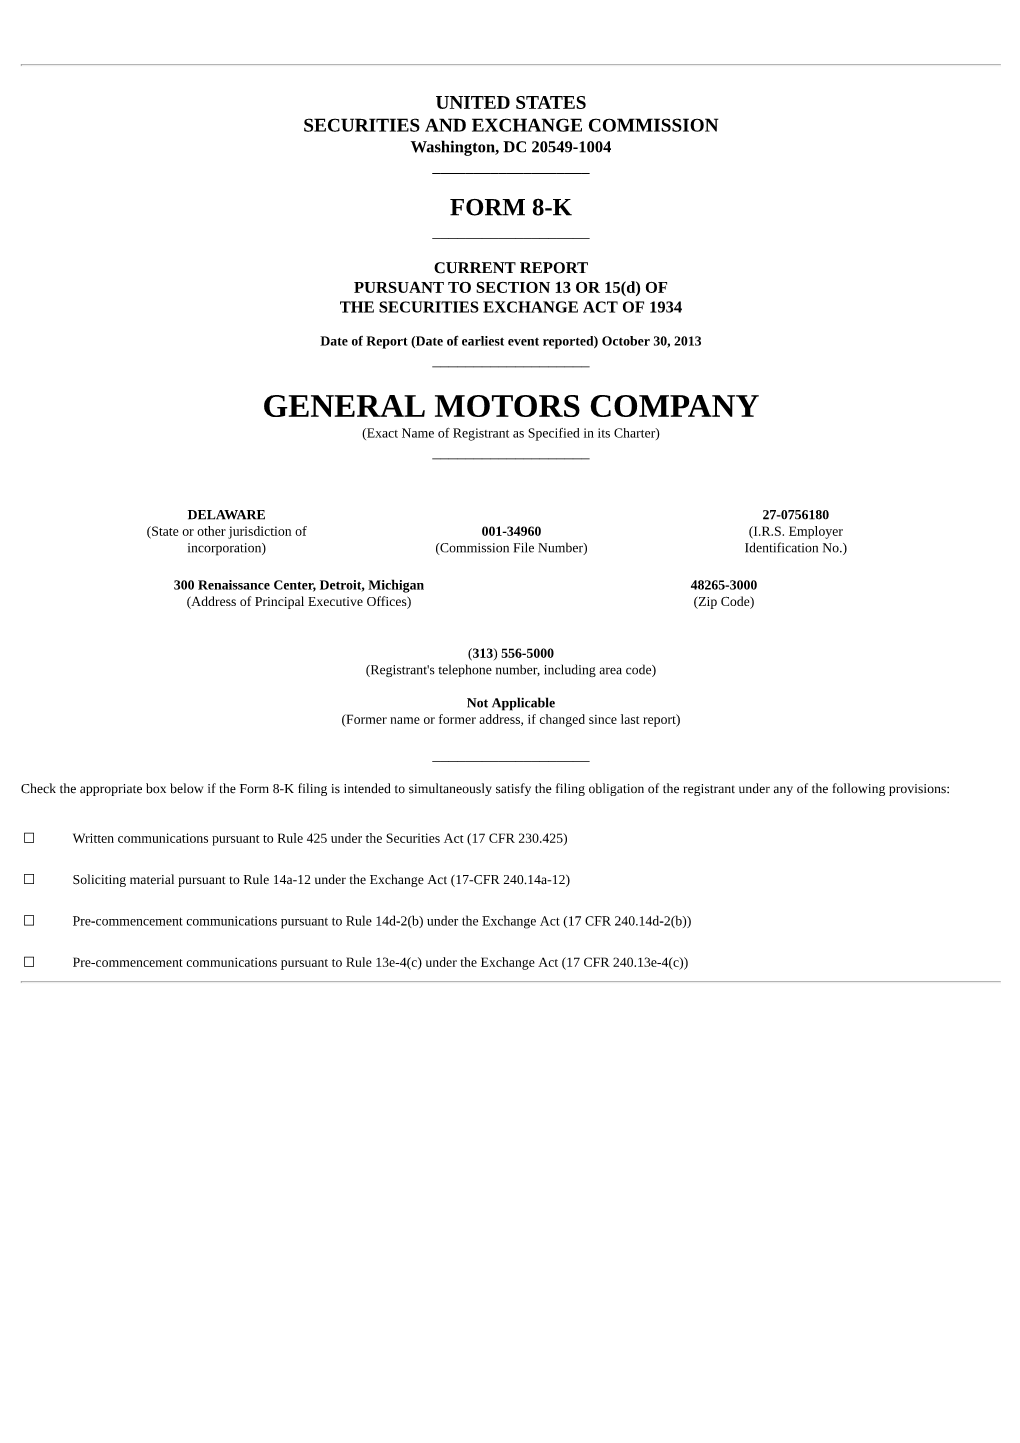 GENERAL MOTORS COMPANY (Exact Name of Registrant As Specified in Its Charter) ______